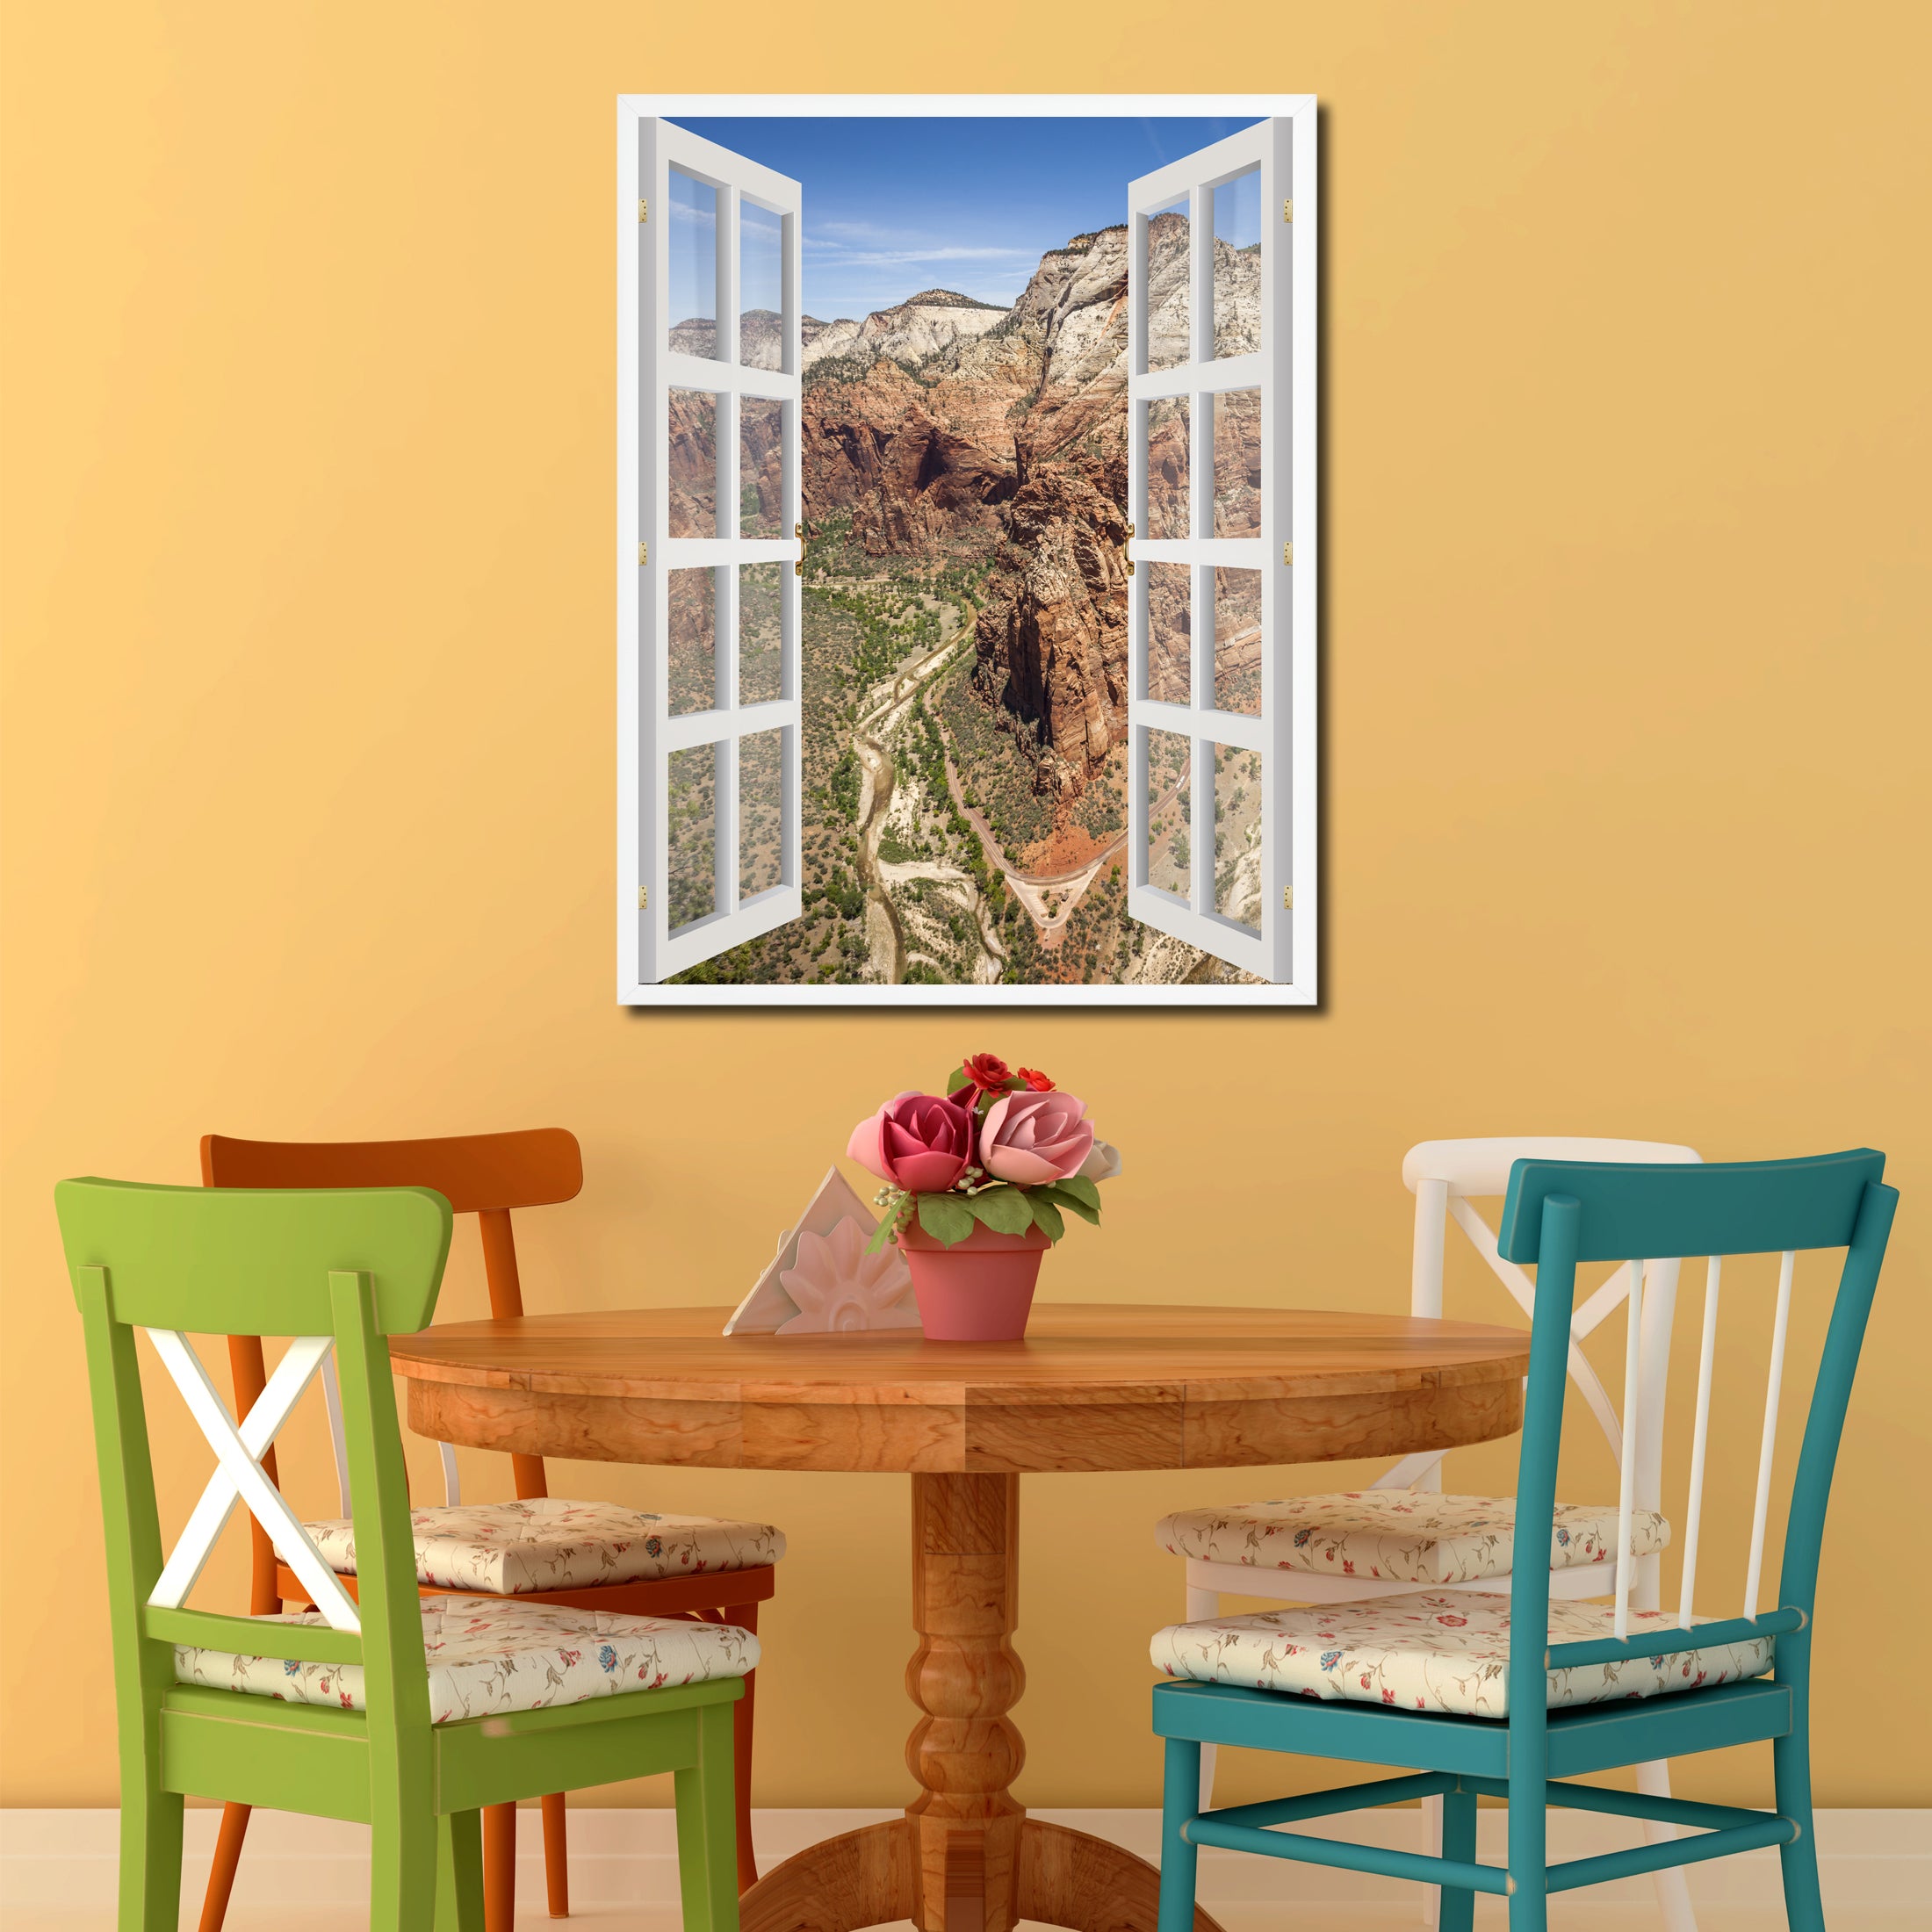 Aerial View Zion National Park Picture French Window Canvas Print with Frame Gifts Home Decor Wall Art Collection